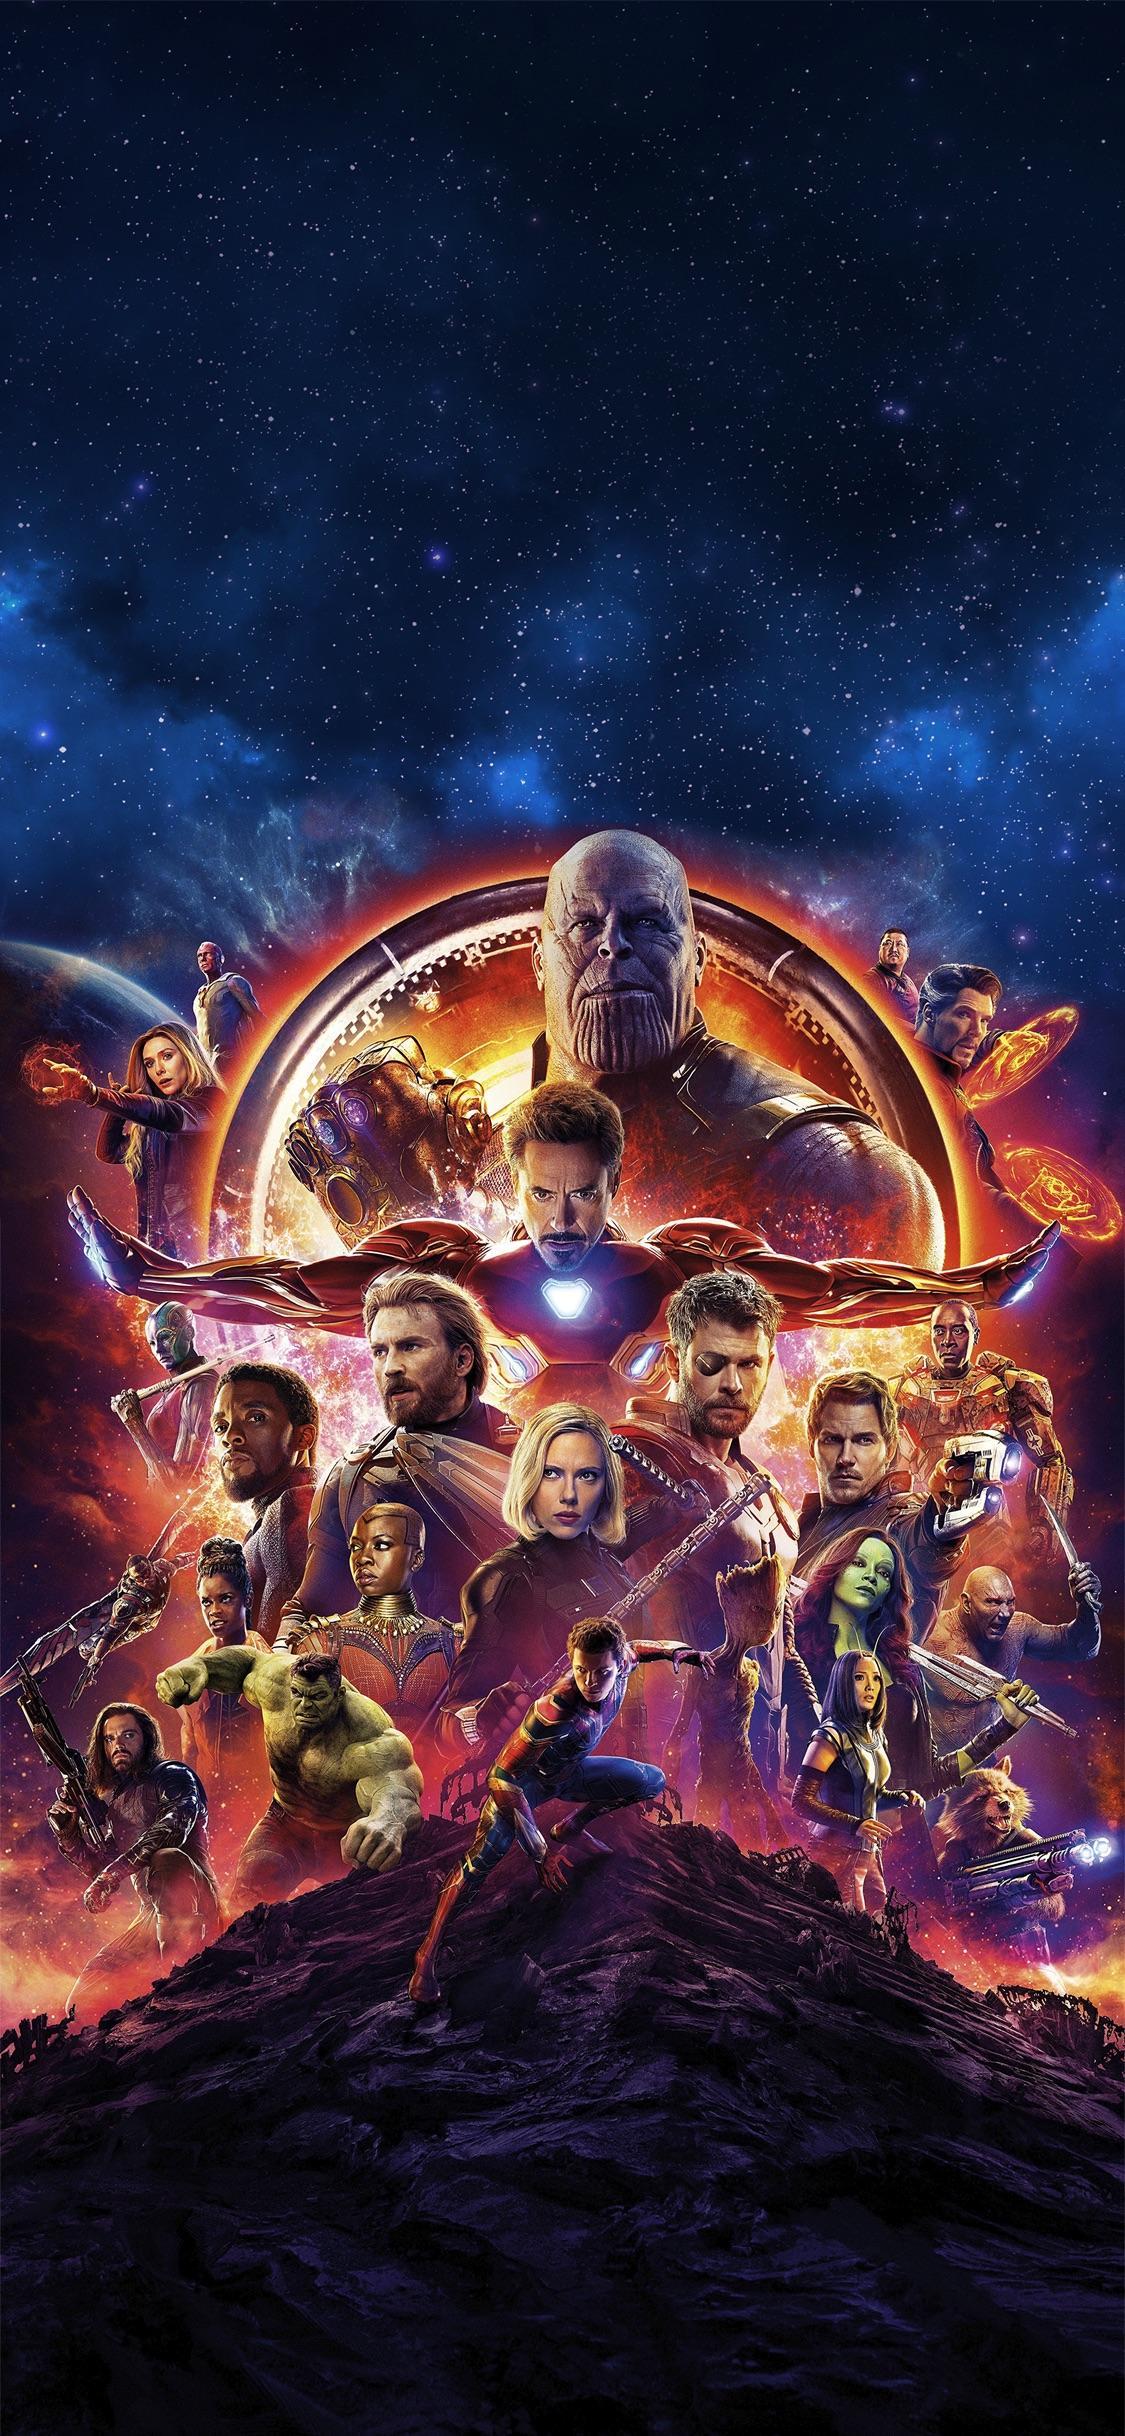 I made an Infinity War wallpaper optimised for